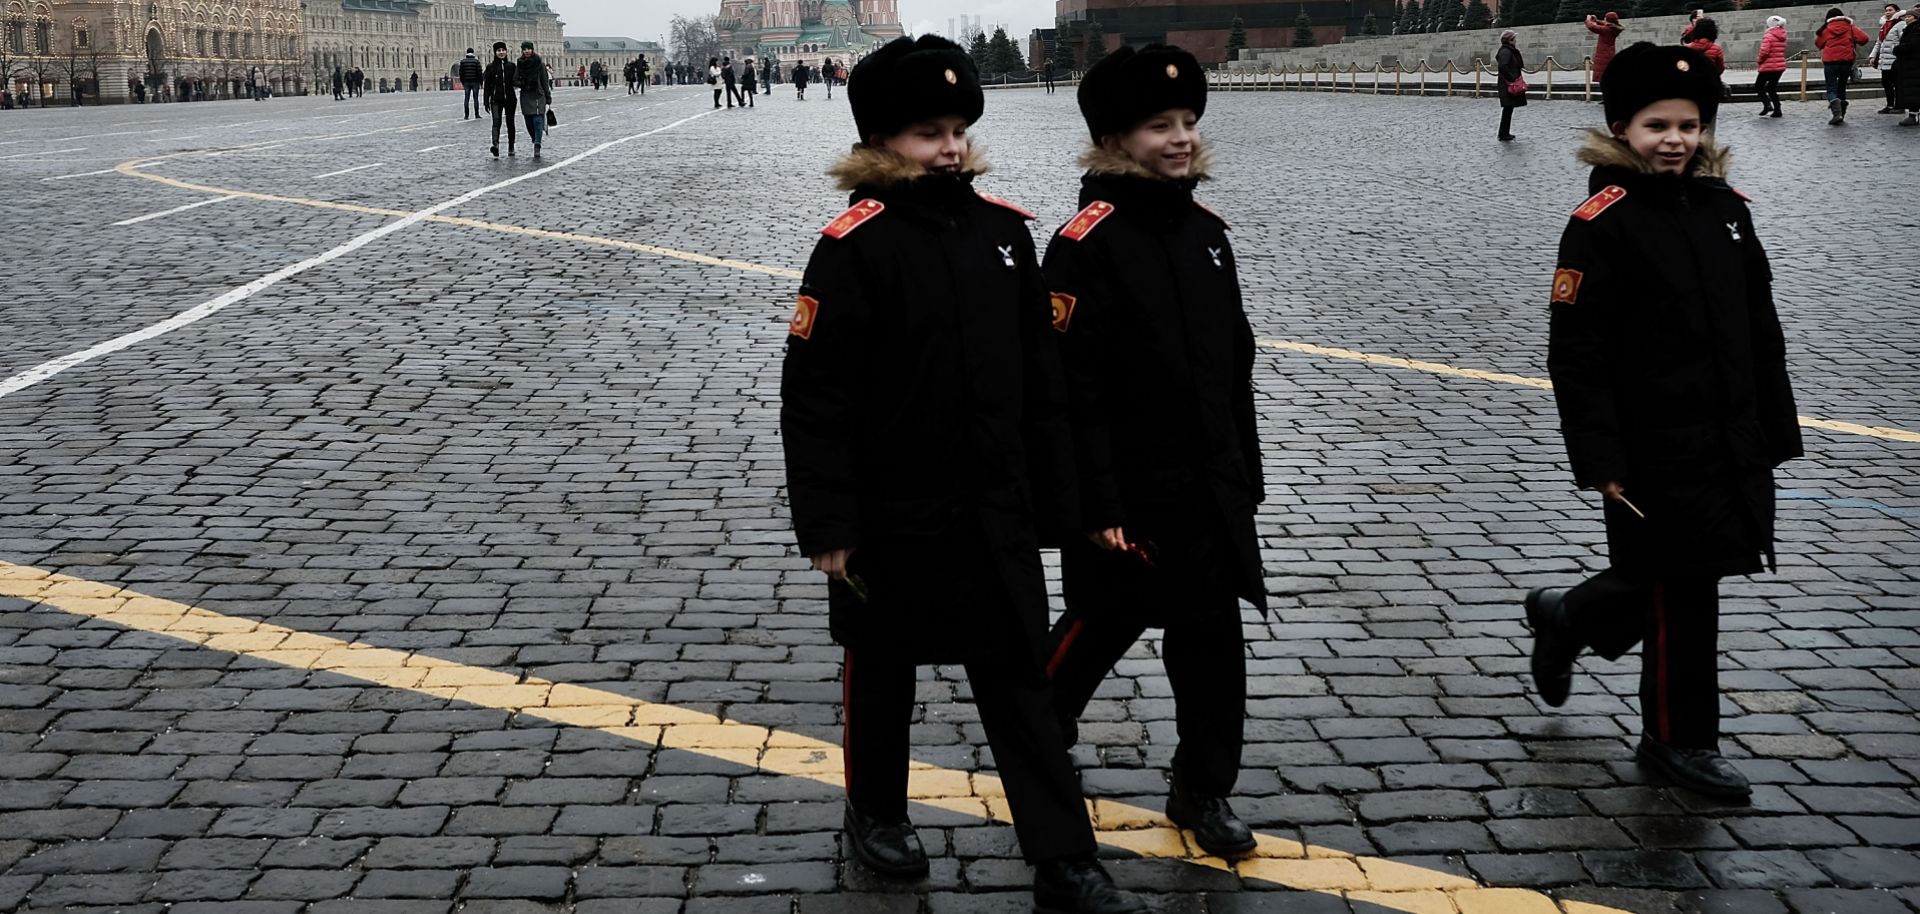 Young boys walk through Moscow's Red Square in military uniforms March 7. In Eurasia, the remnants of the Soviet era are starting to fade as more and more people are born into a post-Soviet world.